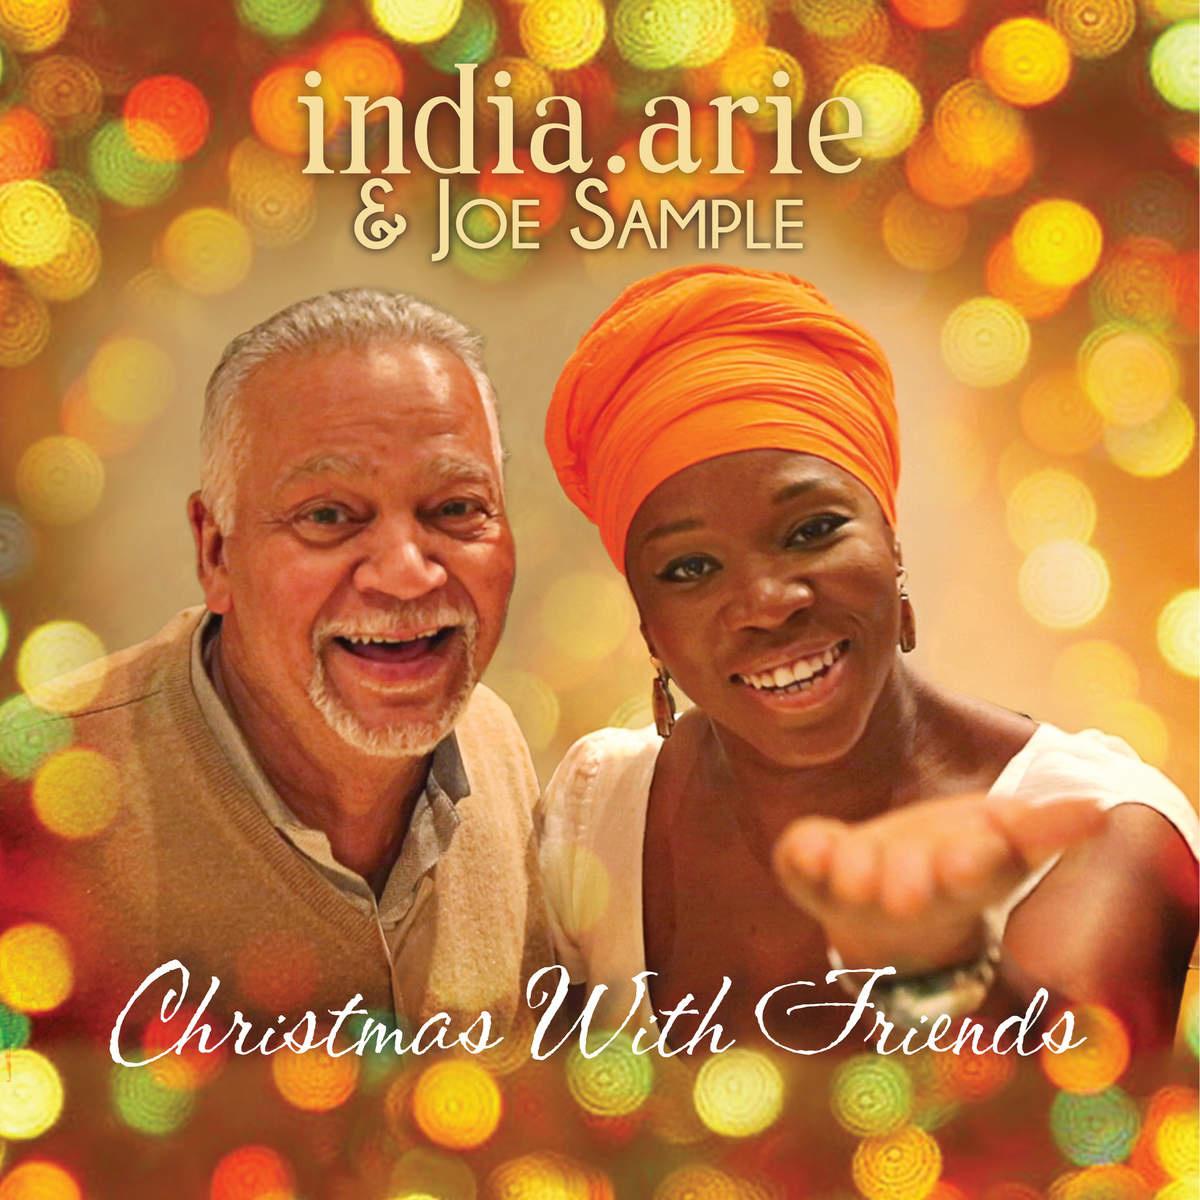 Favorite Time of Year歌词 歌手India.Arie / Tori Kelly-专辑Christmas with Friends-单曲《Favorite Time of Year》LRC歌词下载